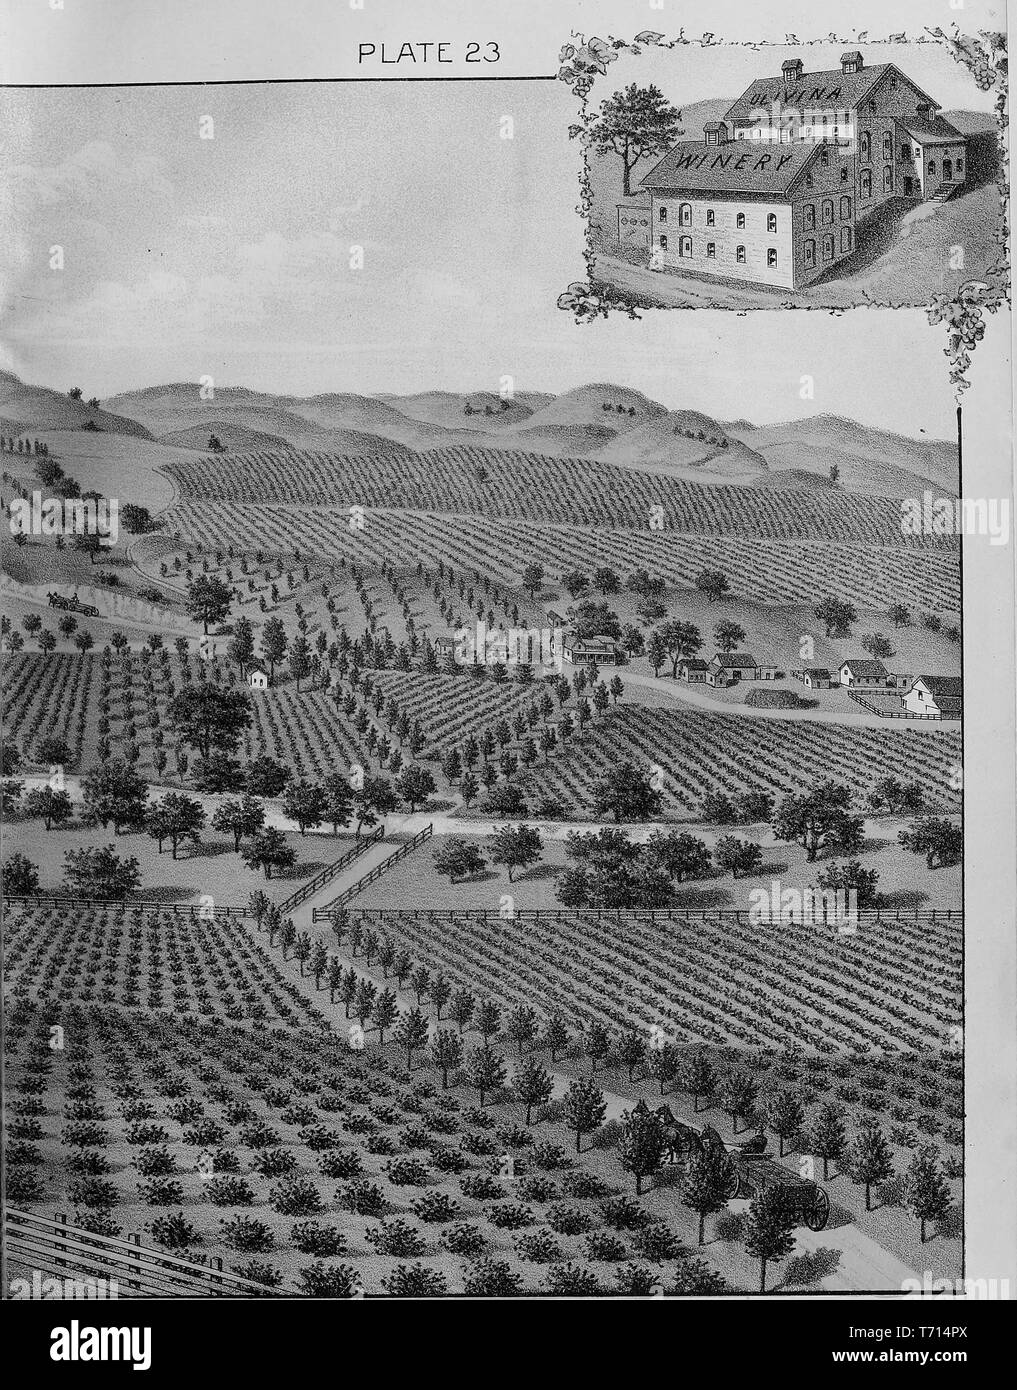 Engraving of the Olivina vineyard and Julius P Smith residence in Livermore Valley, Alameda County, California, from the book 'Illustrated album of Alameda County, California' by Jos, 1893. Alex Colquhoun. Courtesy Internet Archive. () Stock Photo